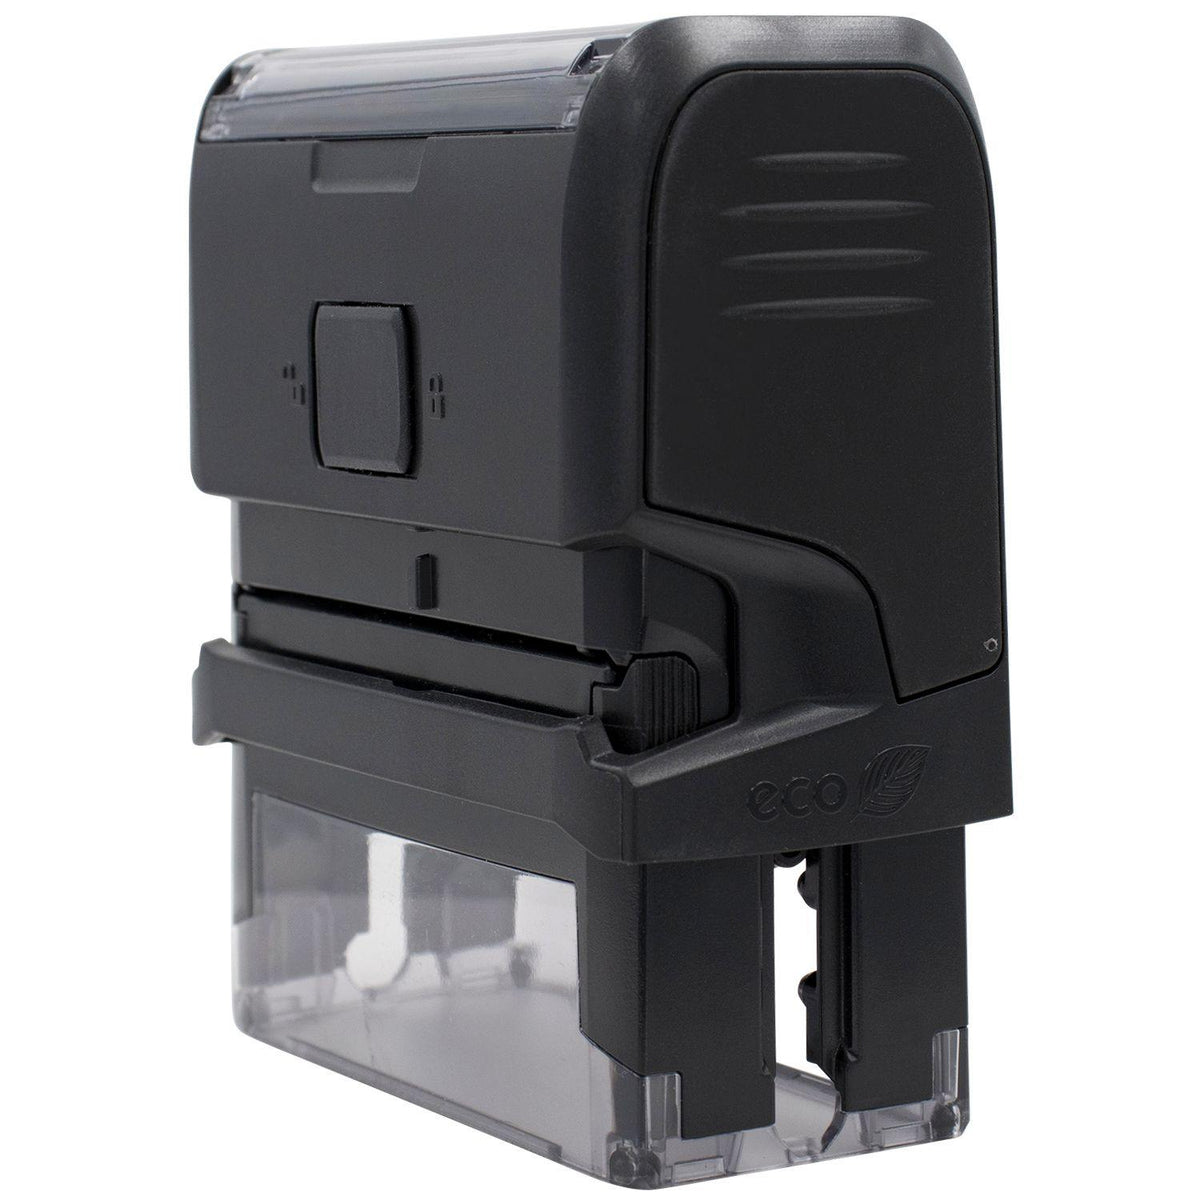 Side View of Large Self Inking Approved For Payment Stamp at an Angle